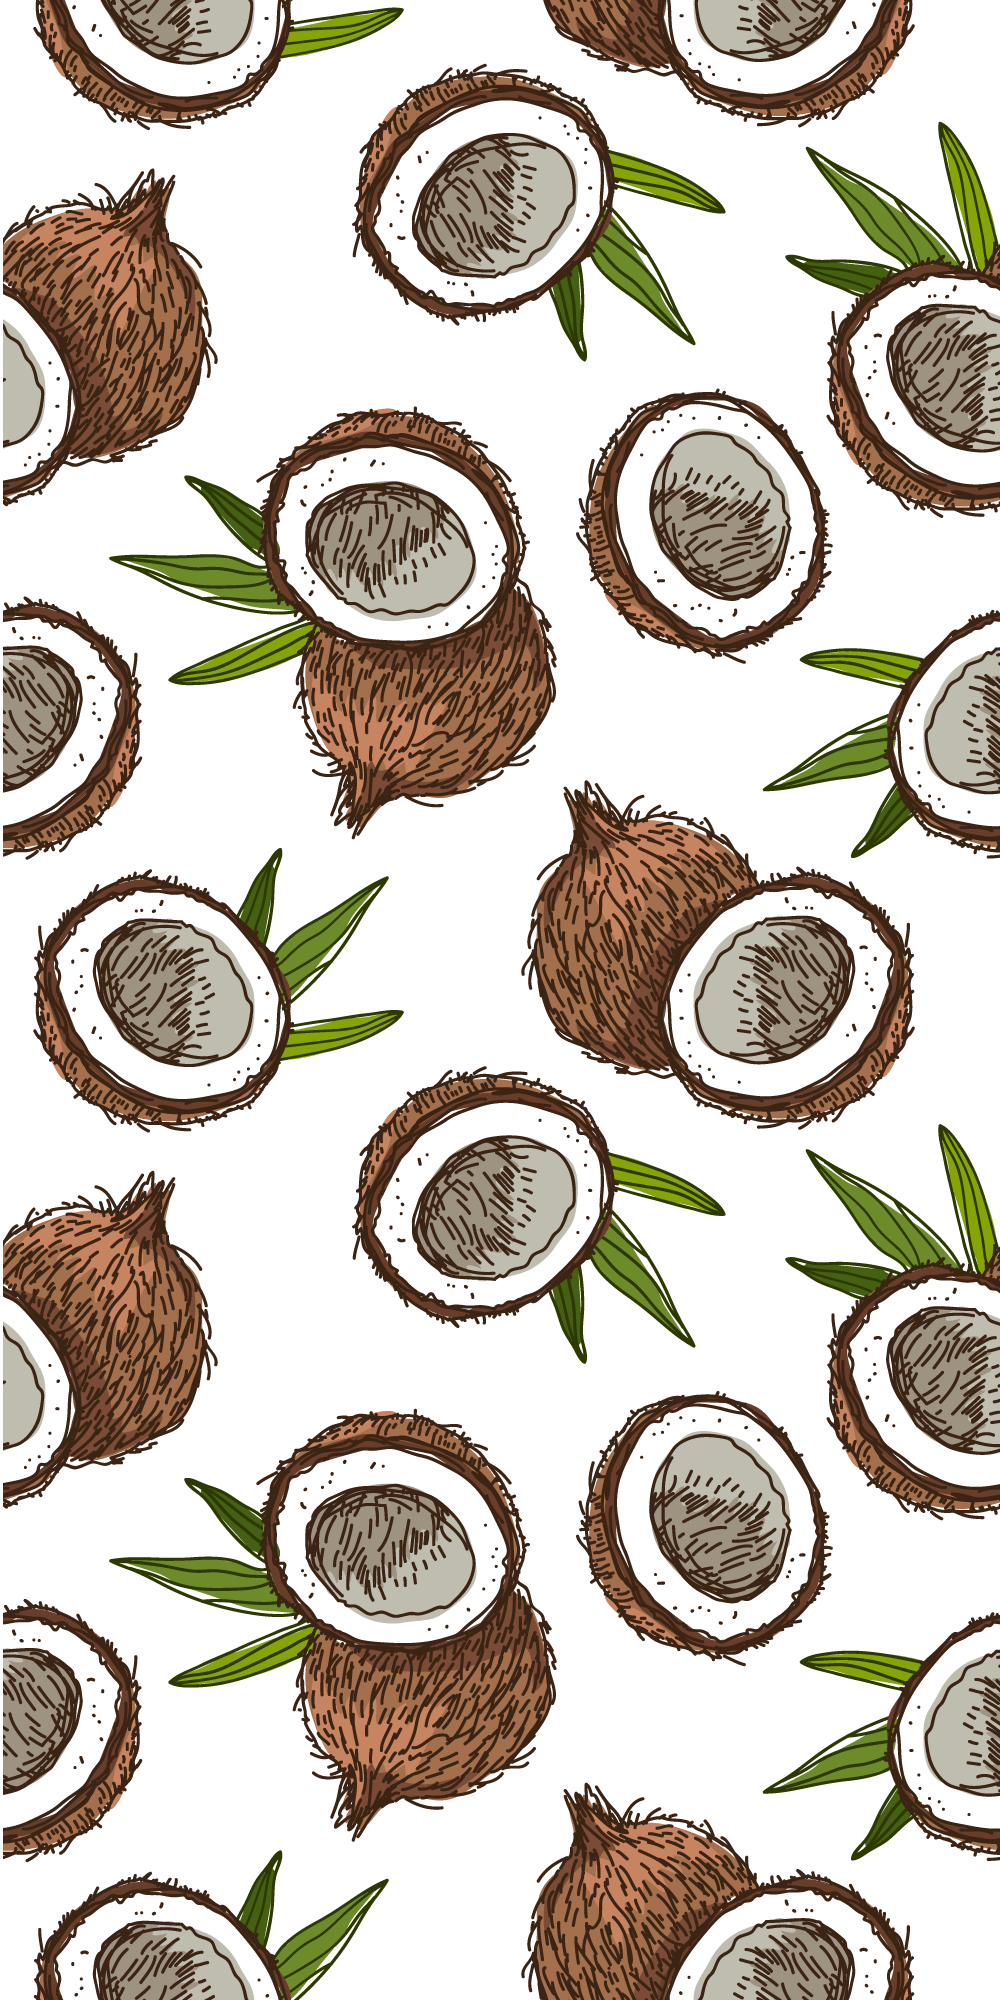 A pattern of coconuts and leaves - Coconut